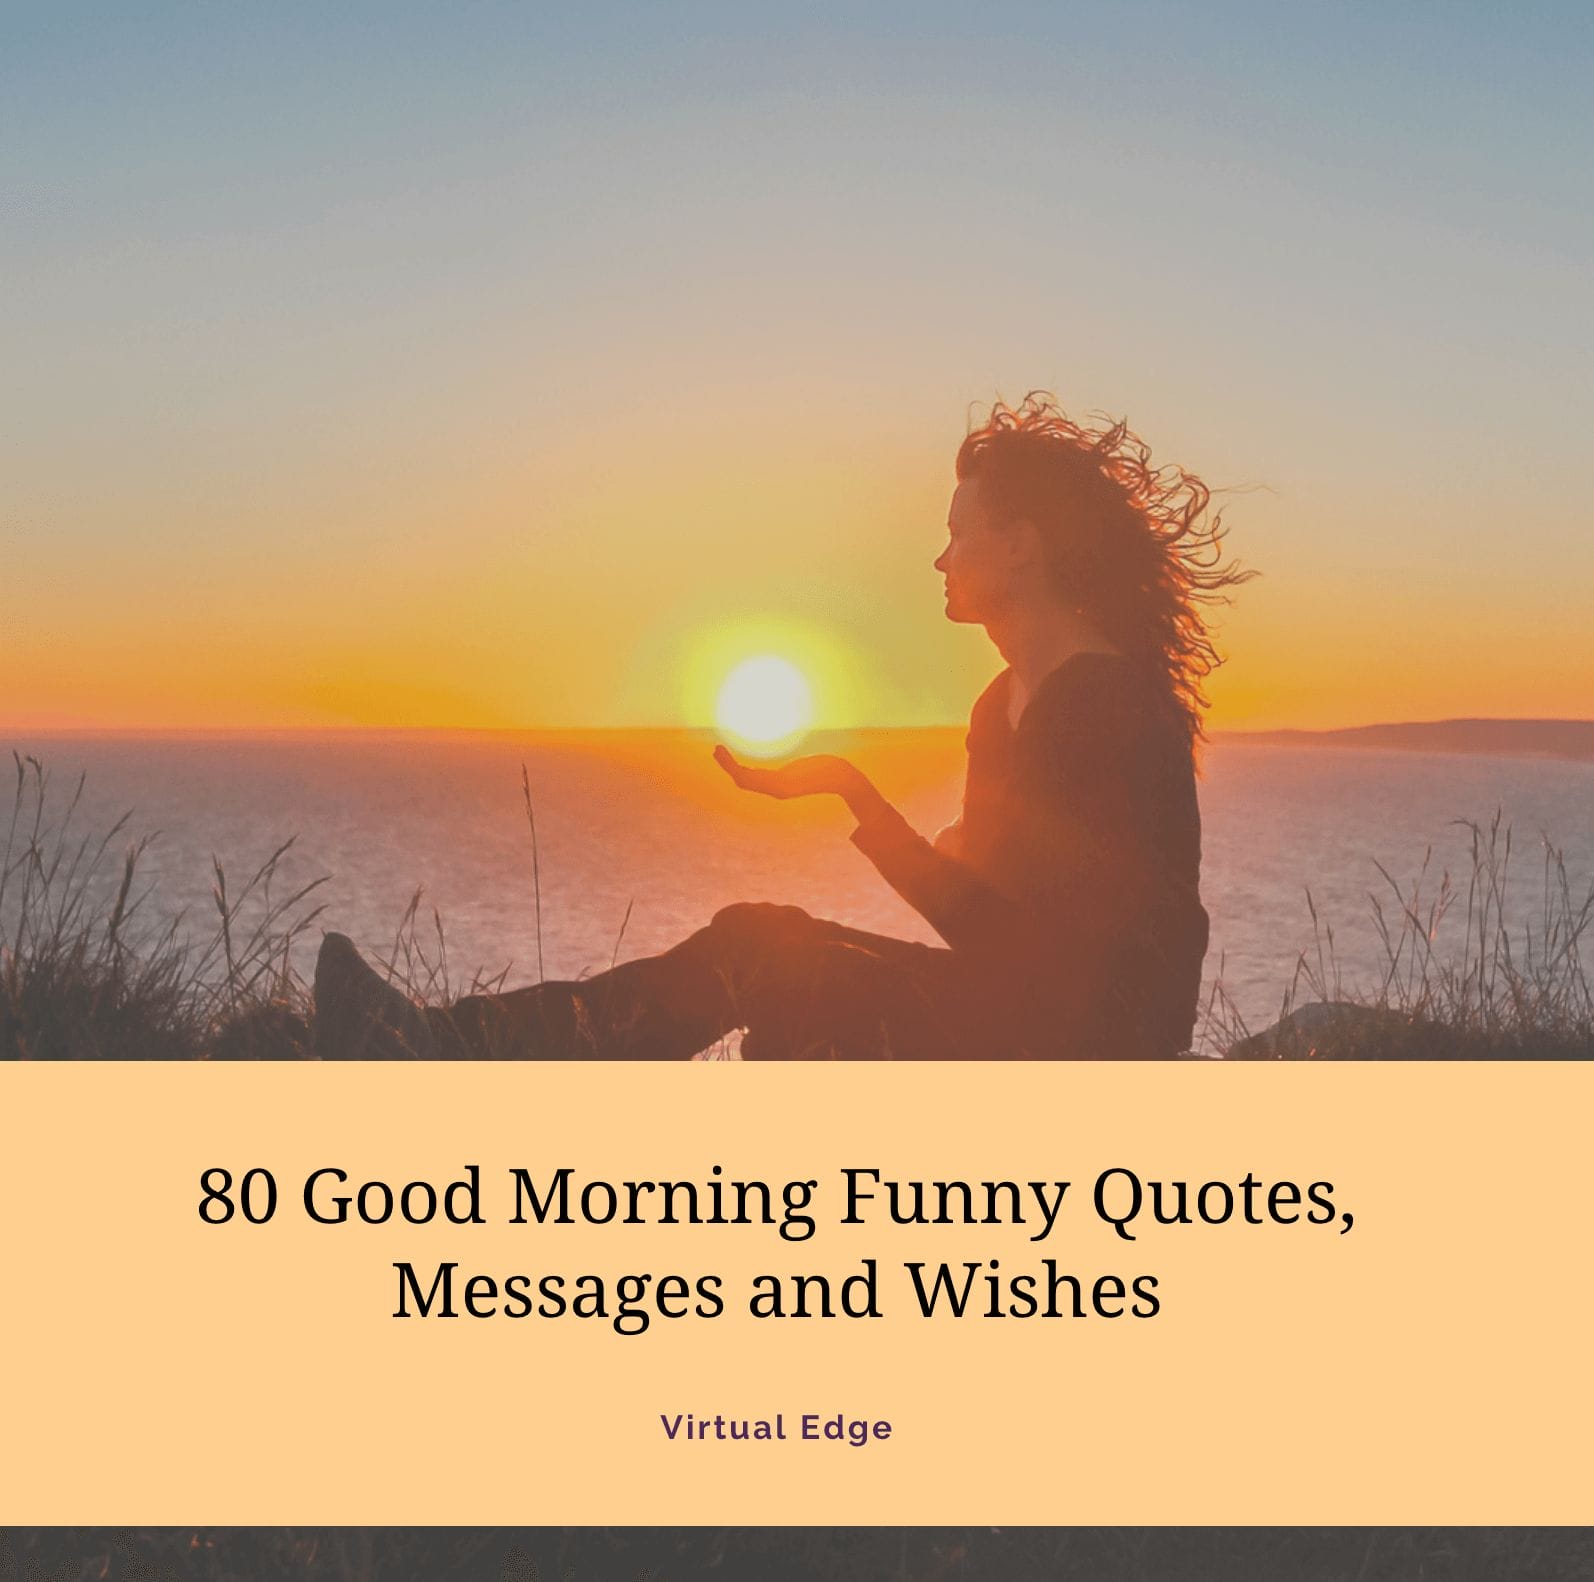 80 Good Morning Funny Quotes, Messages And Wishes | Virtual Edge